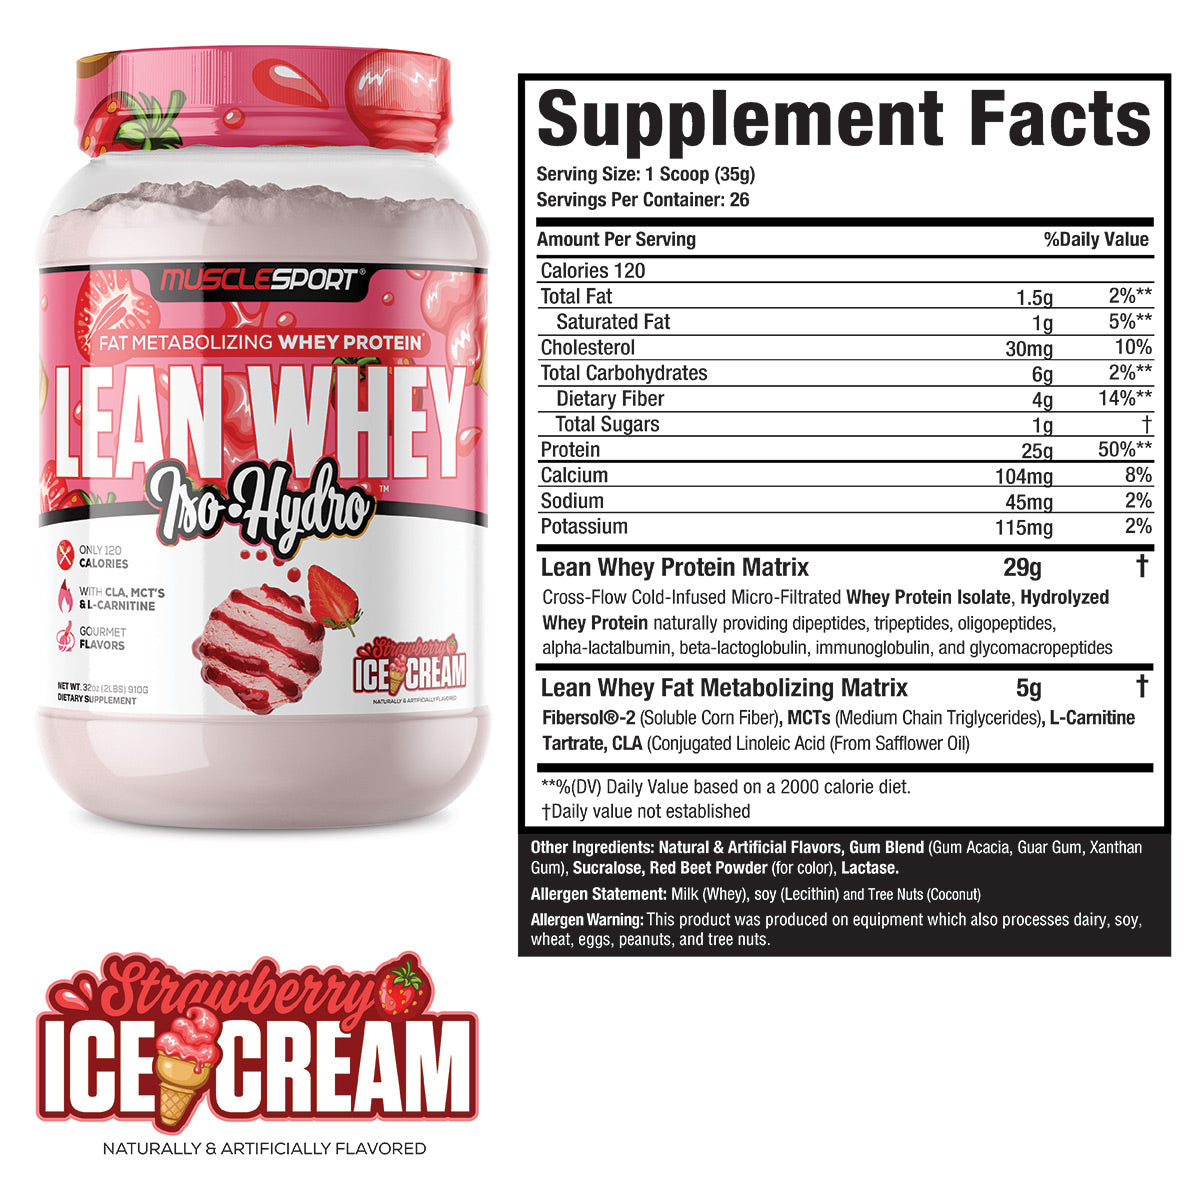 Strawberry Ice Cream Lean Whey Supplement Facts